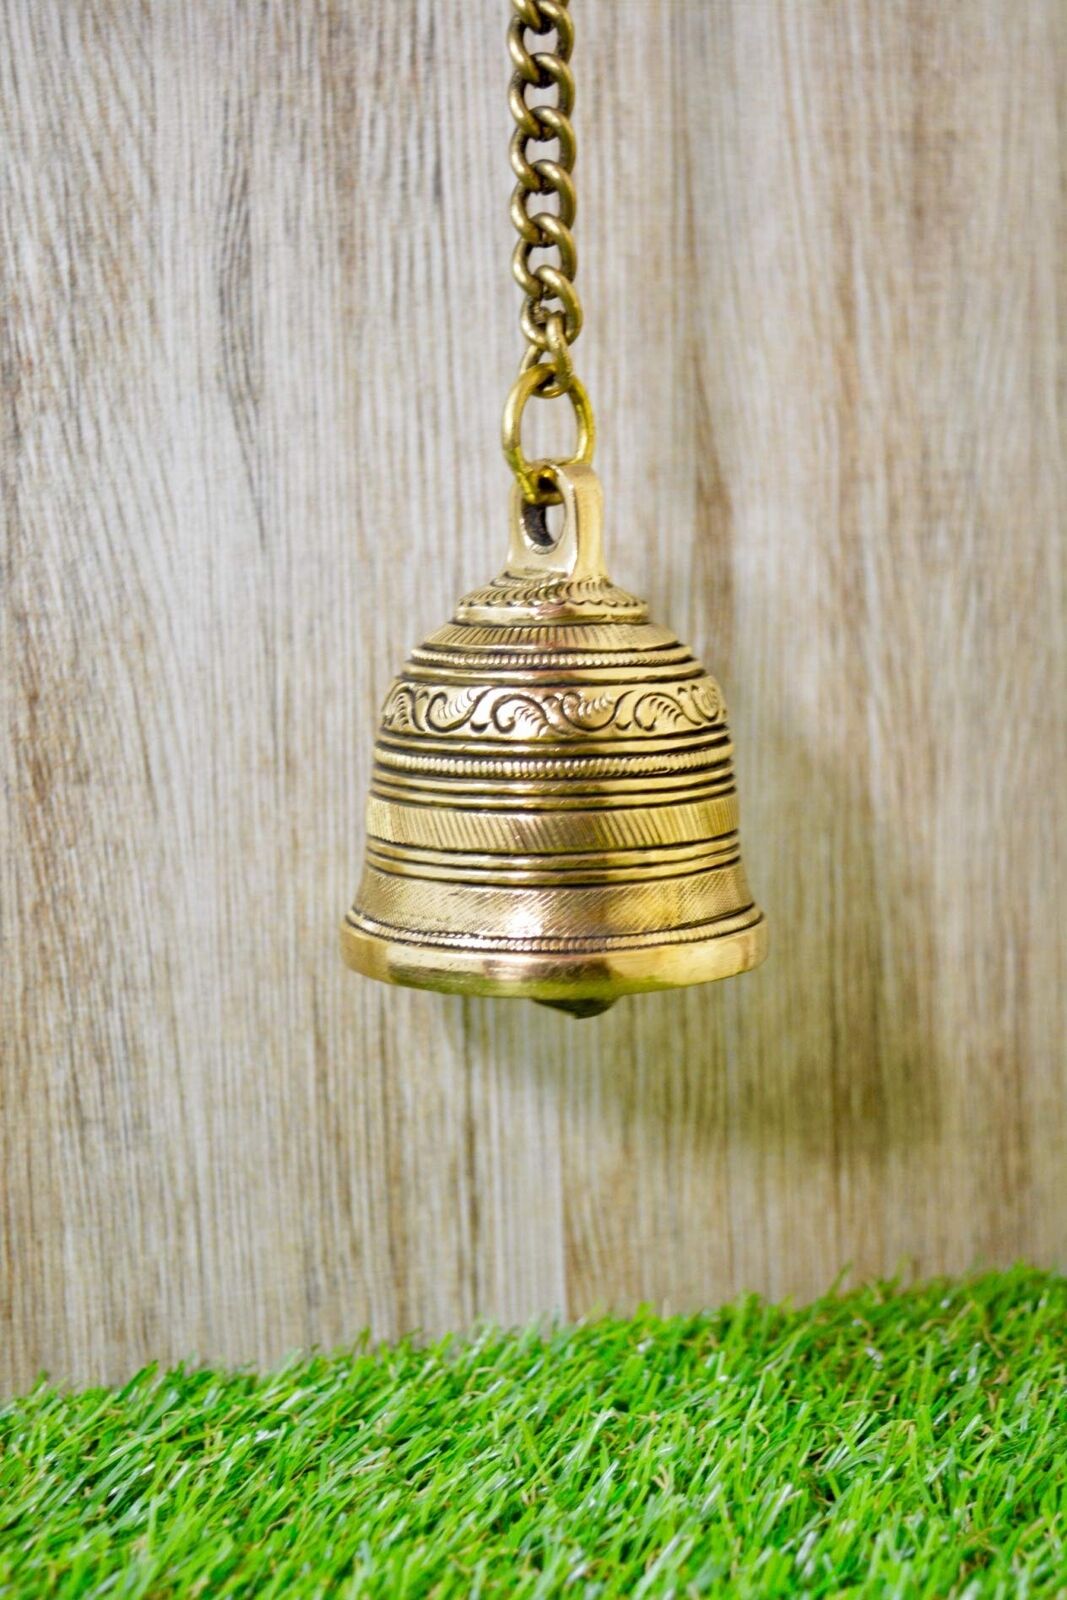 Vintage Matte Wall Hanging Bell With Brass Chain And Hook For Gates Home Office 